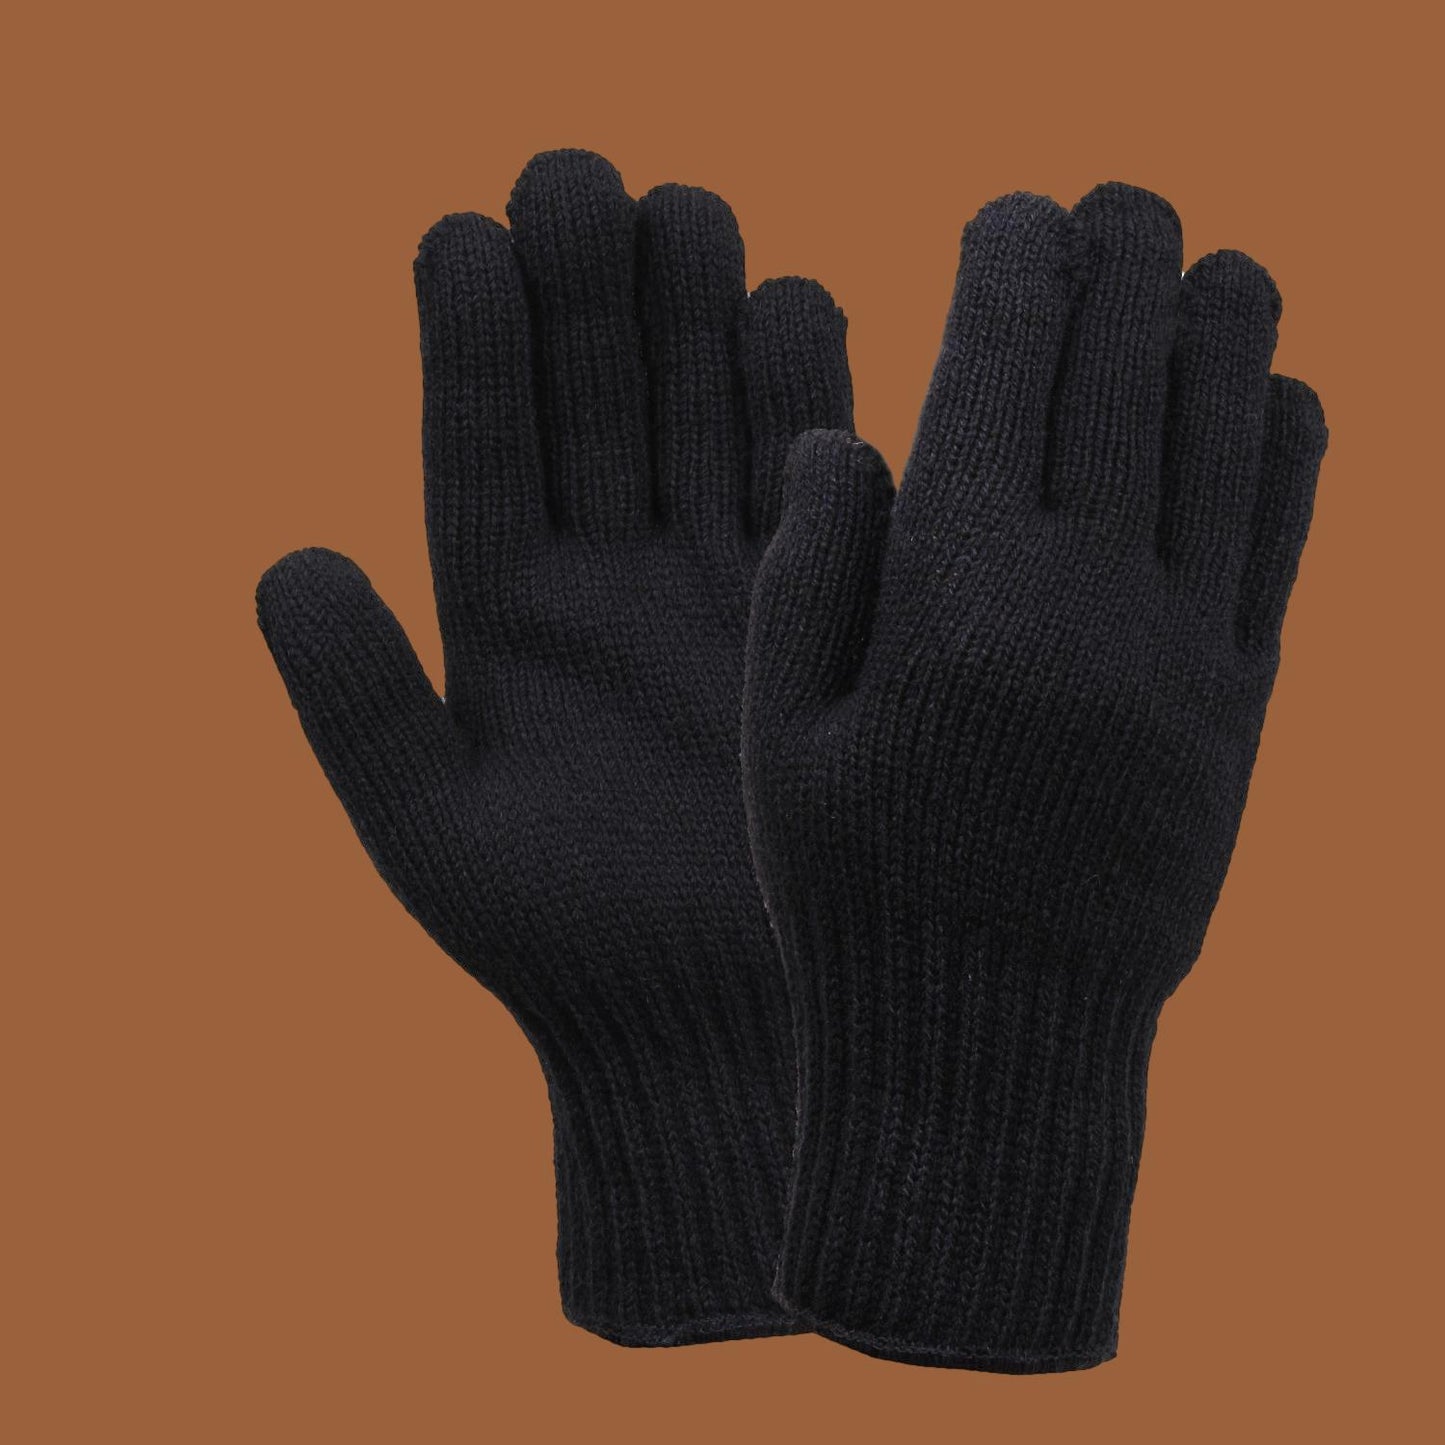 U.S MILITARY STYLE D3A COLD WEATHER GLOVE LINERS 85% WOOL 15% NYLON SIZE X-LARGE